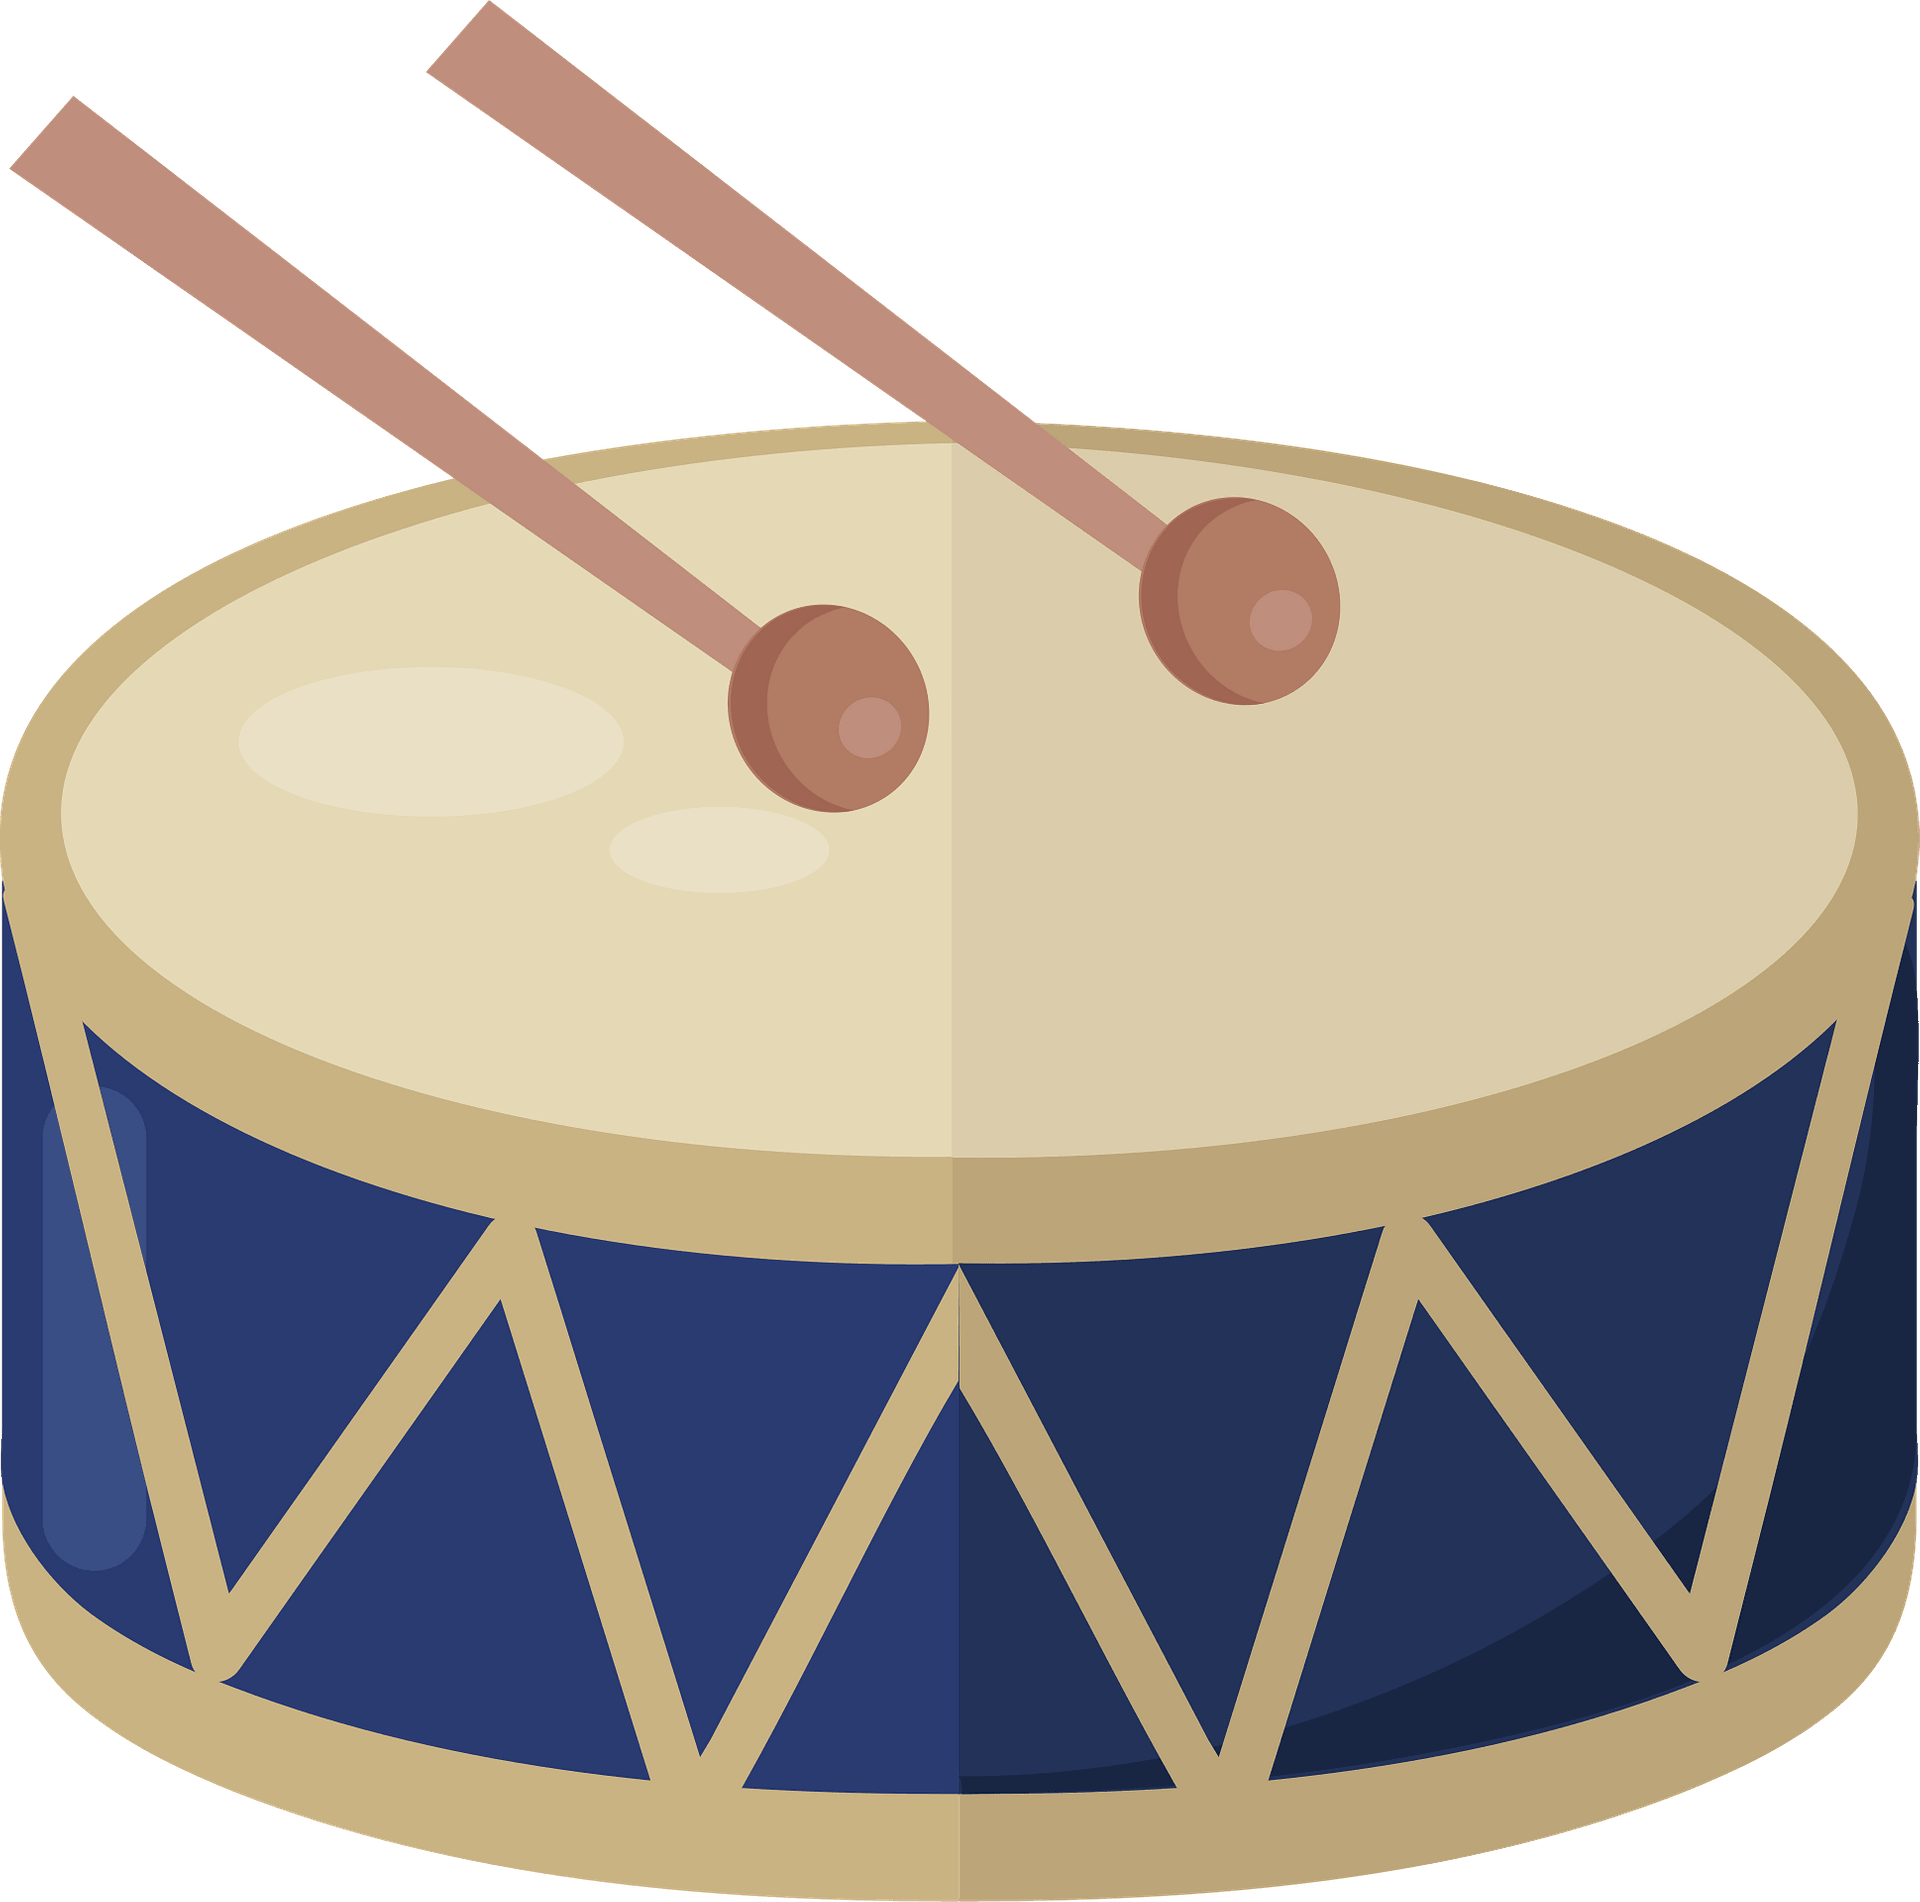 Percussion Instruments | Music Kids Playing Instruments of the ...